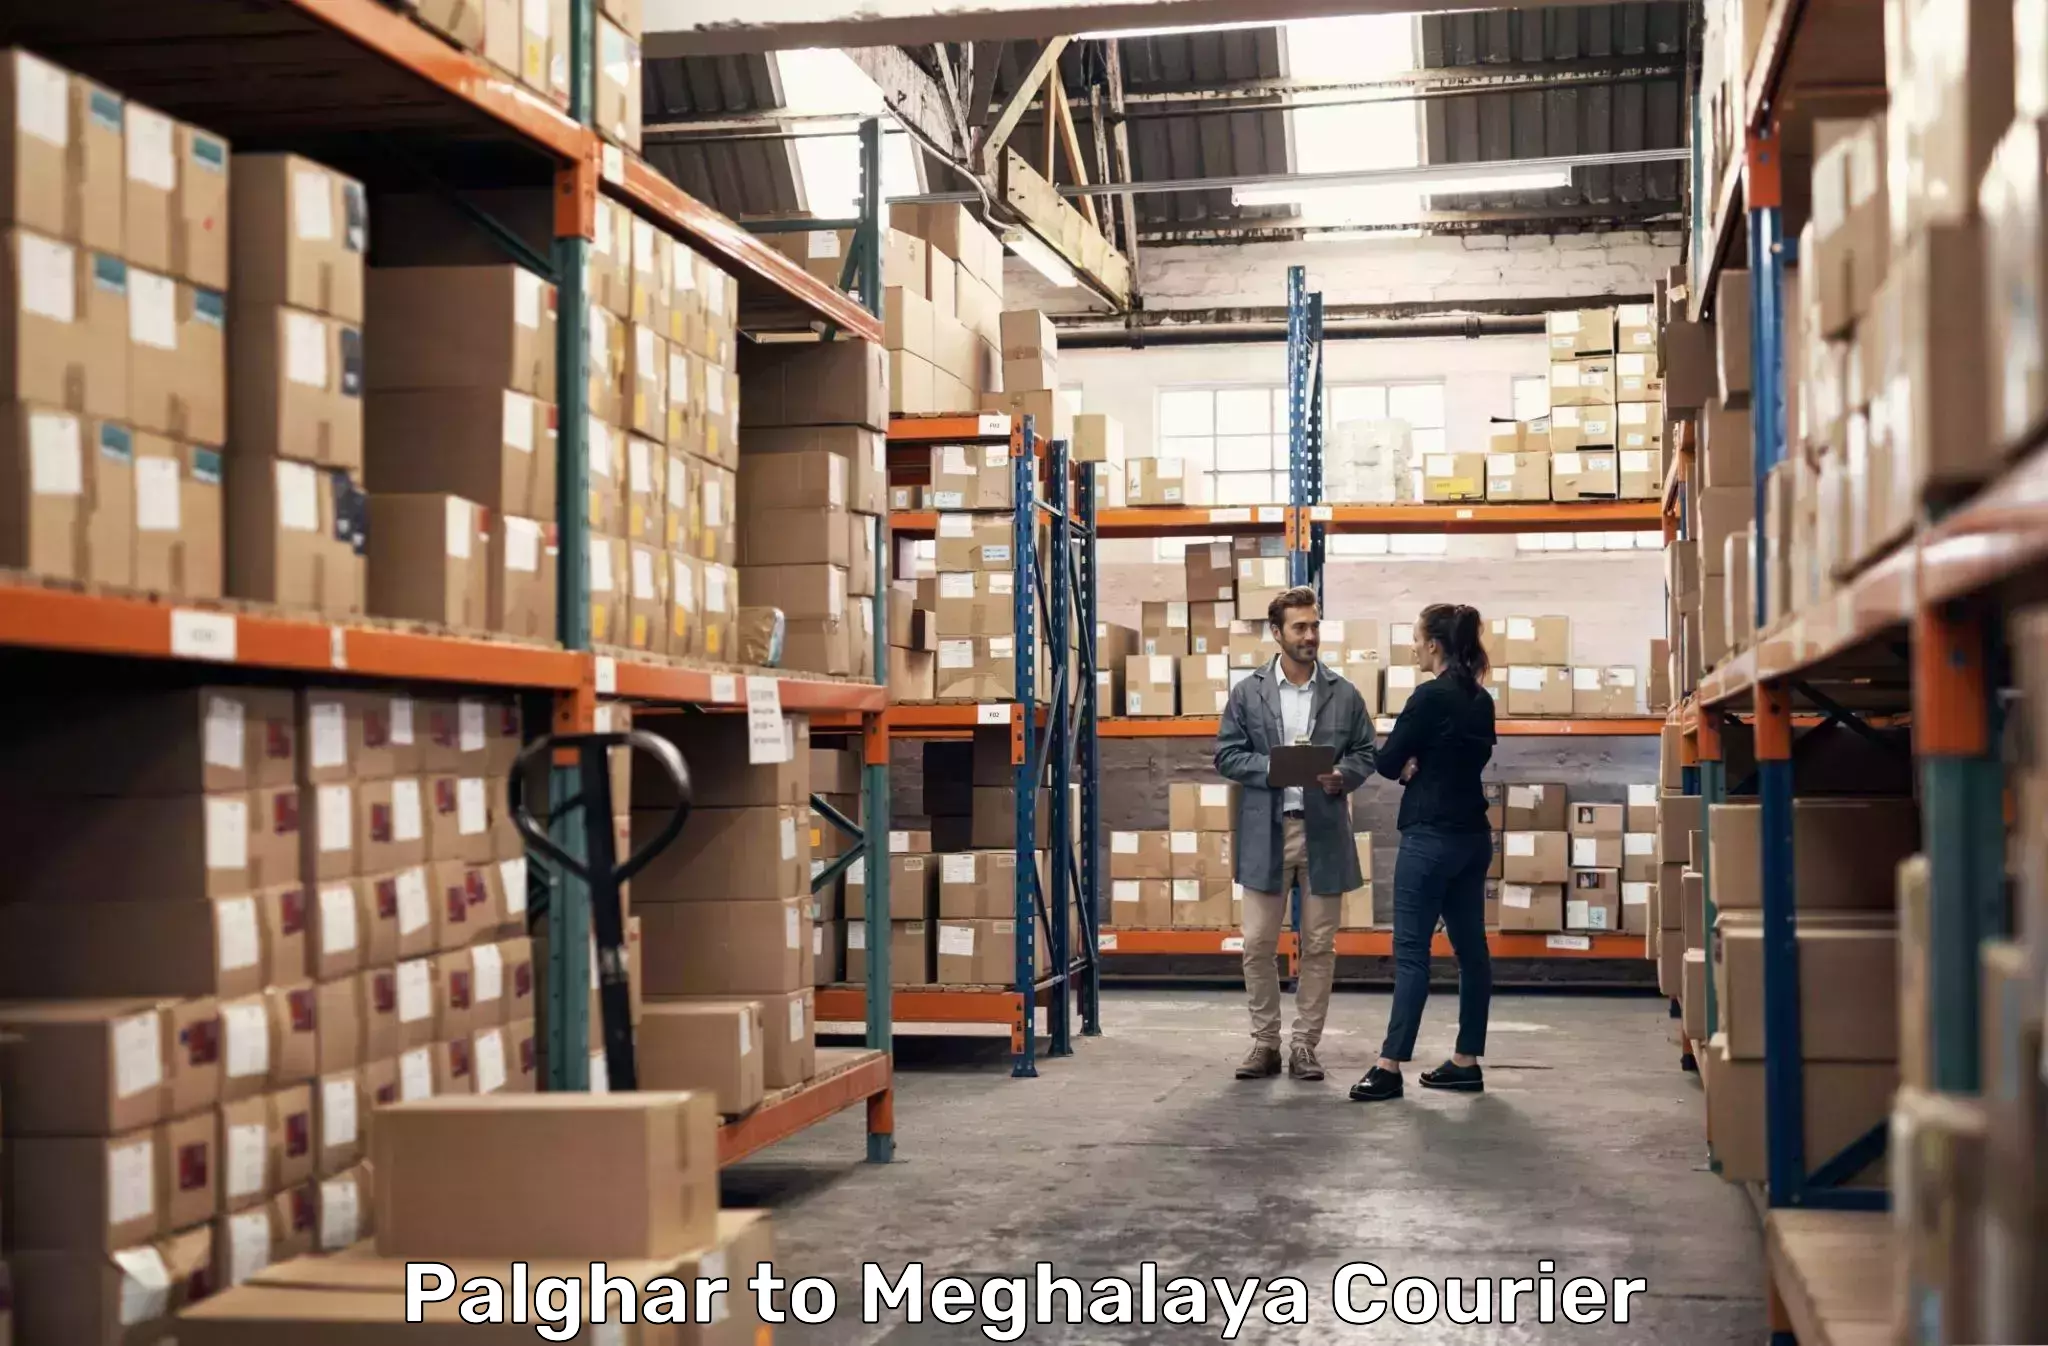 Express delivery capabilities Palghar to Meghalaya